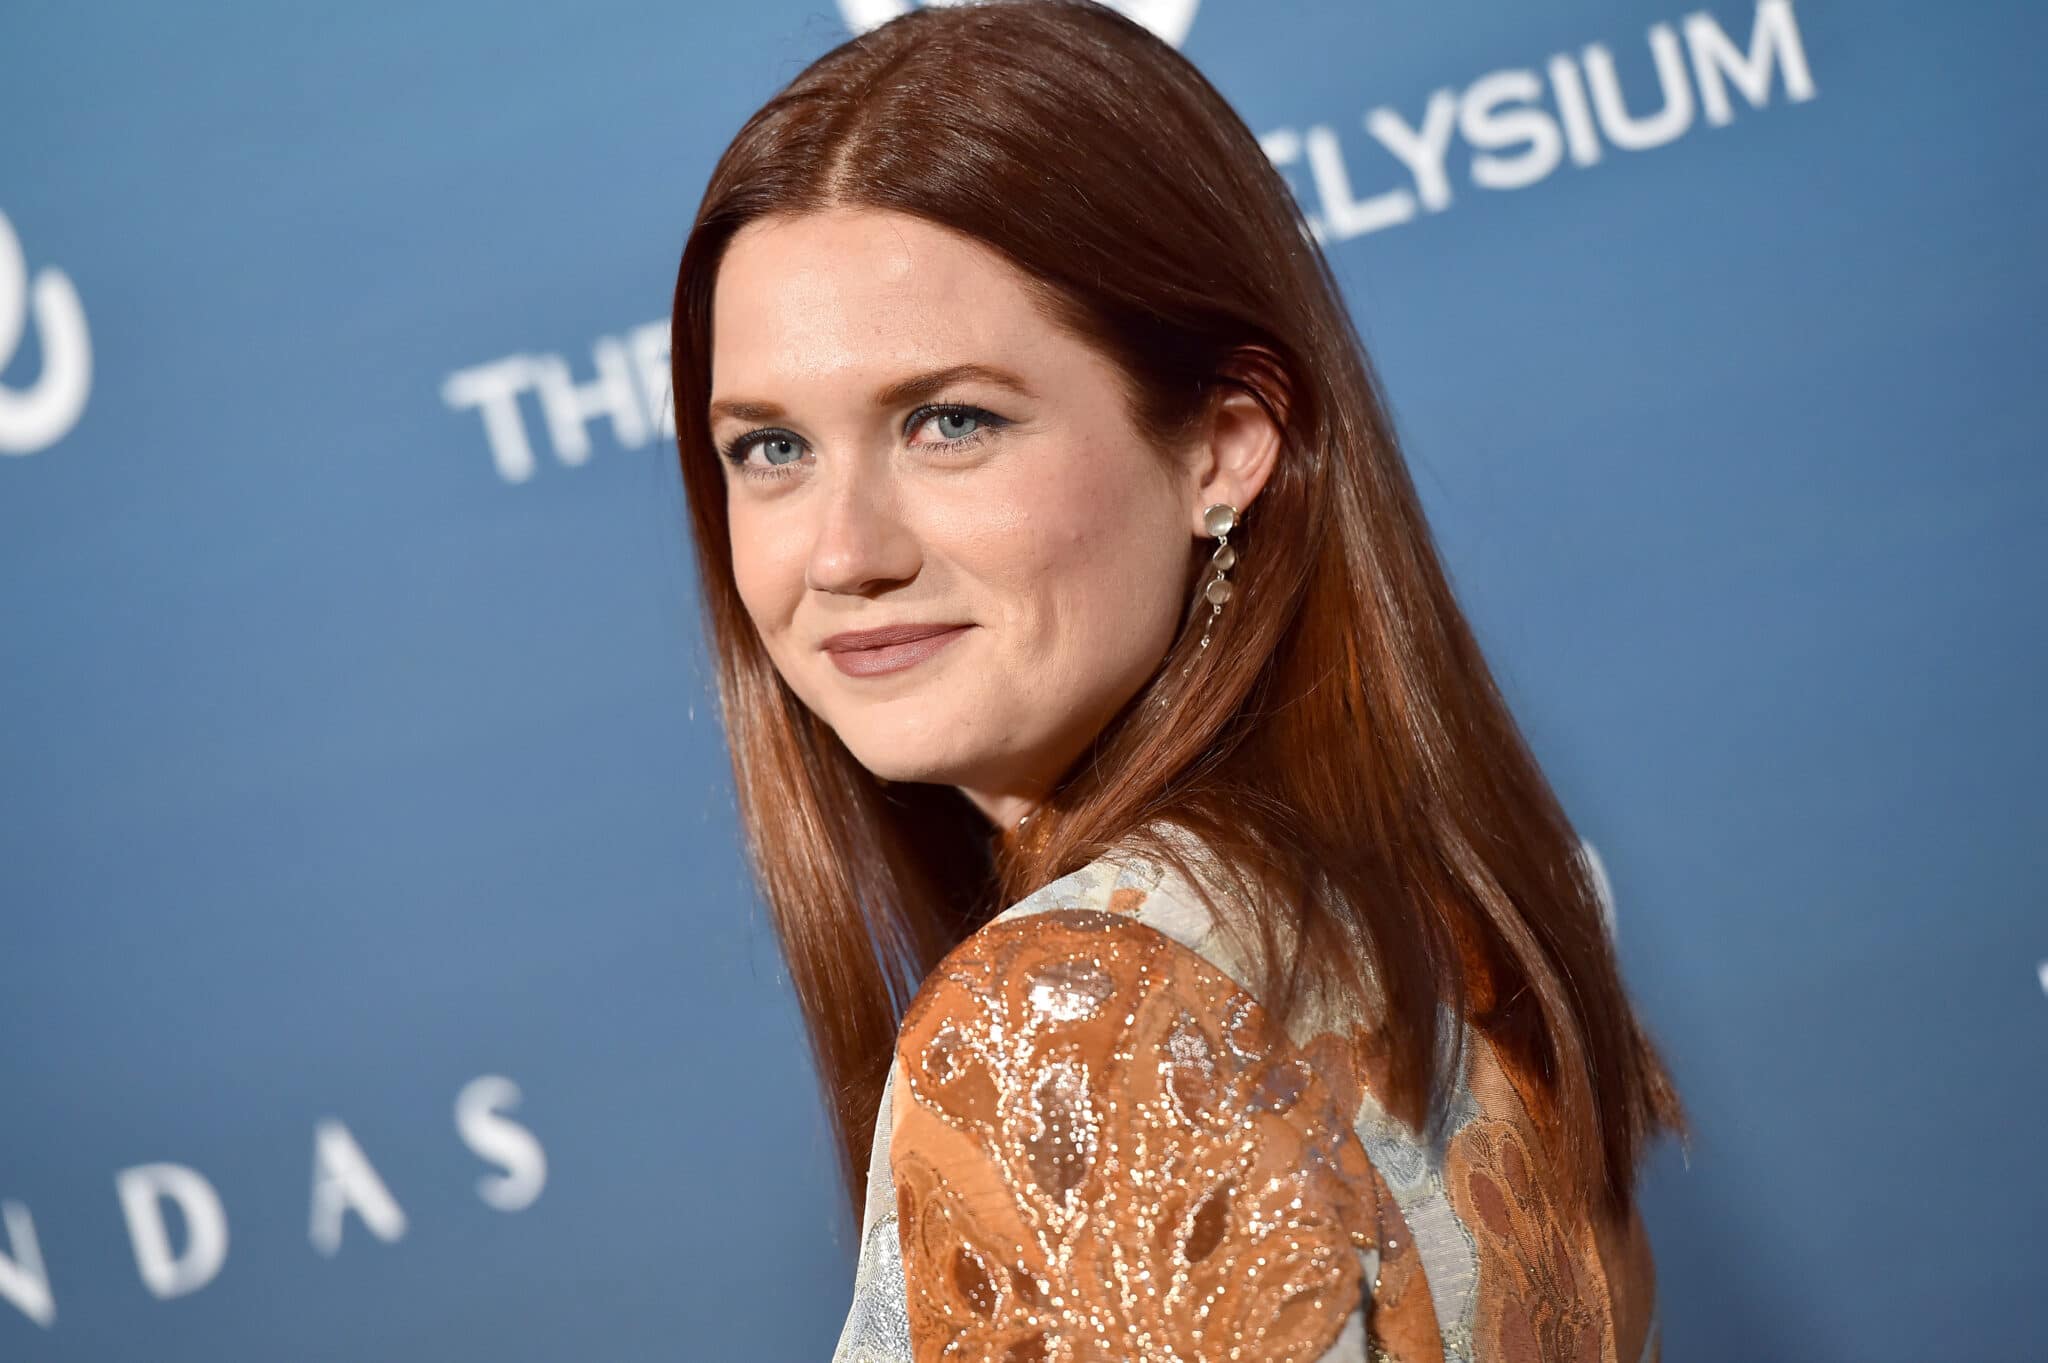 Harry Potter’s Bonnie Wright explains why she doesn’t want to talk about JK Rowling’s views anymore